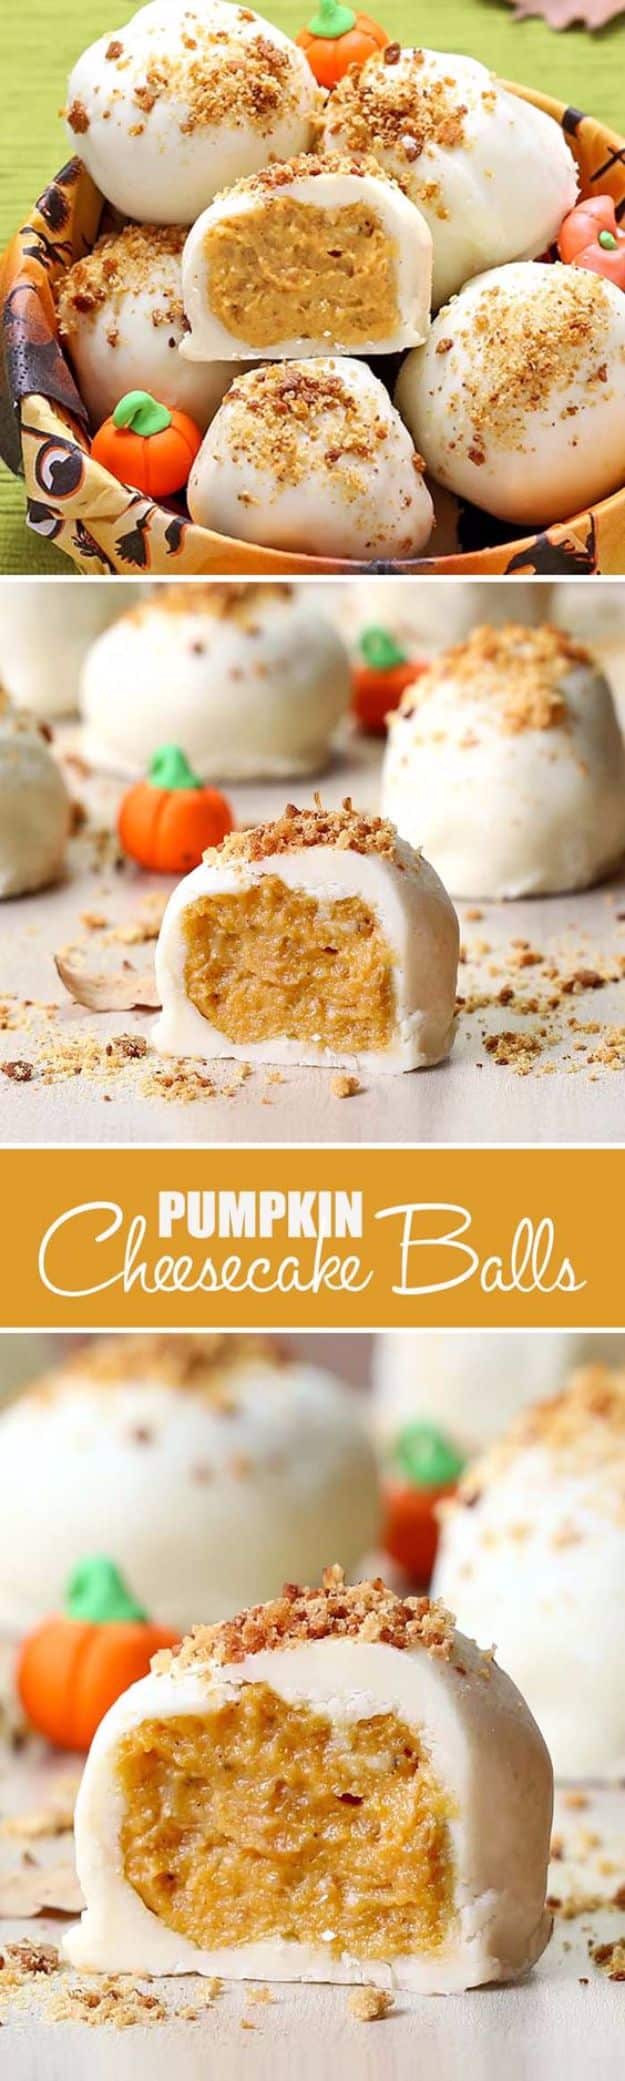 Sweet Halloween Party Recipes for Dessert - Pumpkin Cheesecake Balls - Healthy Ideas for Kids for School, Teens and Adults - Easy and Quick Recipes and Idea for Dips, Chips, Spooky Cookies and Treats - Appetizers and Finger Foods Made With Vegetables, No Candy, Cheap Food, Scary DIY Party Foods With Step by Step Tutorials #halloween #halloweenrecipes #halloweenparty